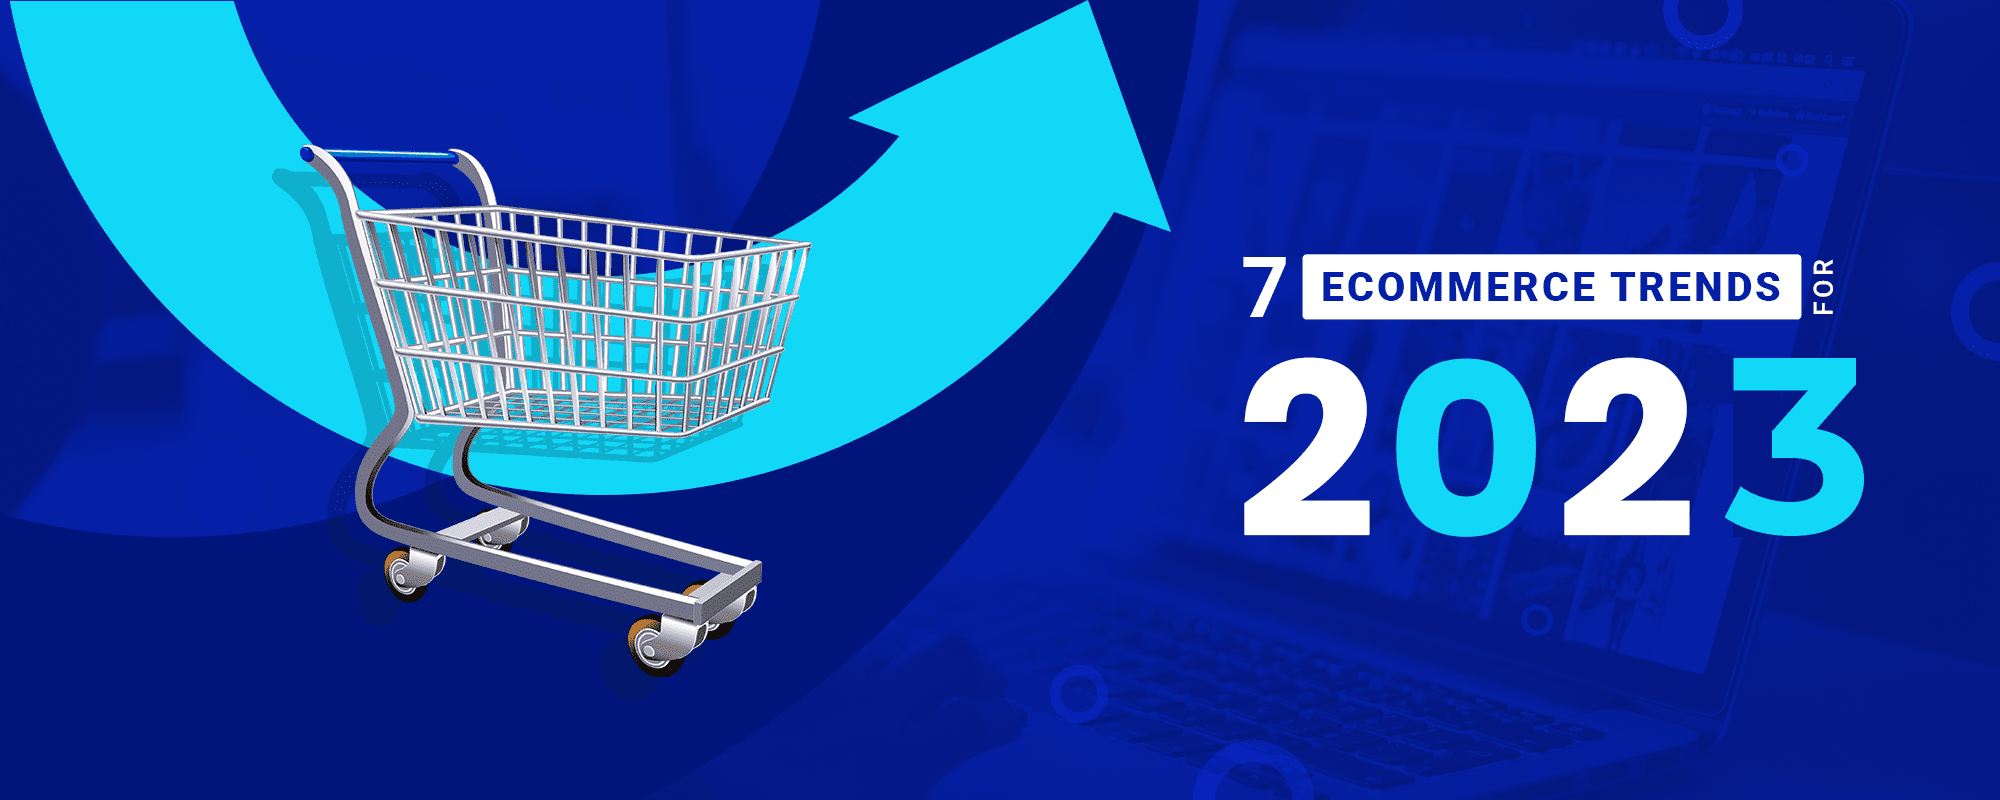 Top 7 Ecommerce Trends for 2023